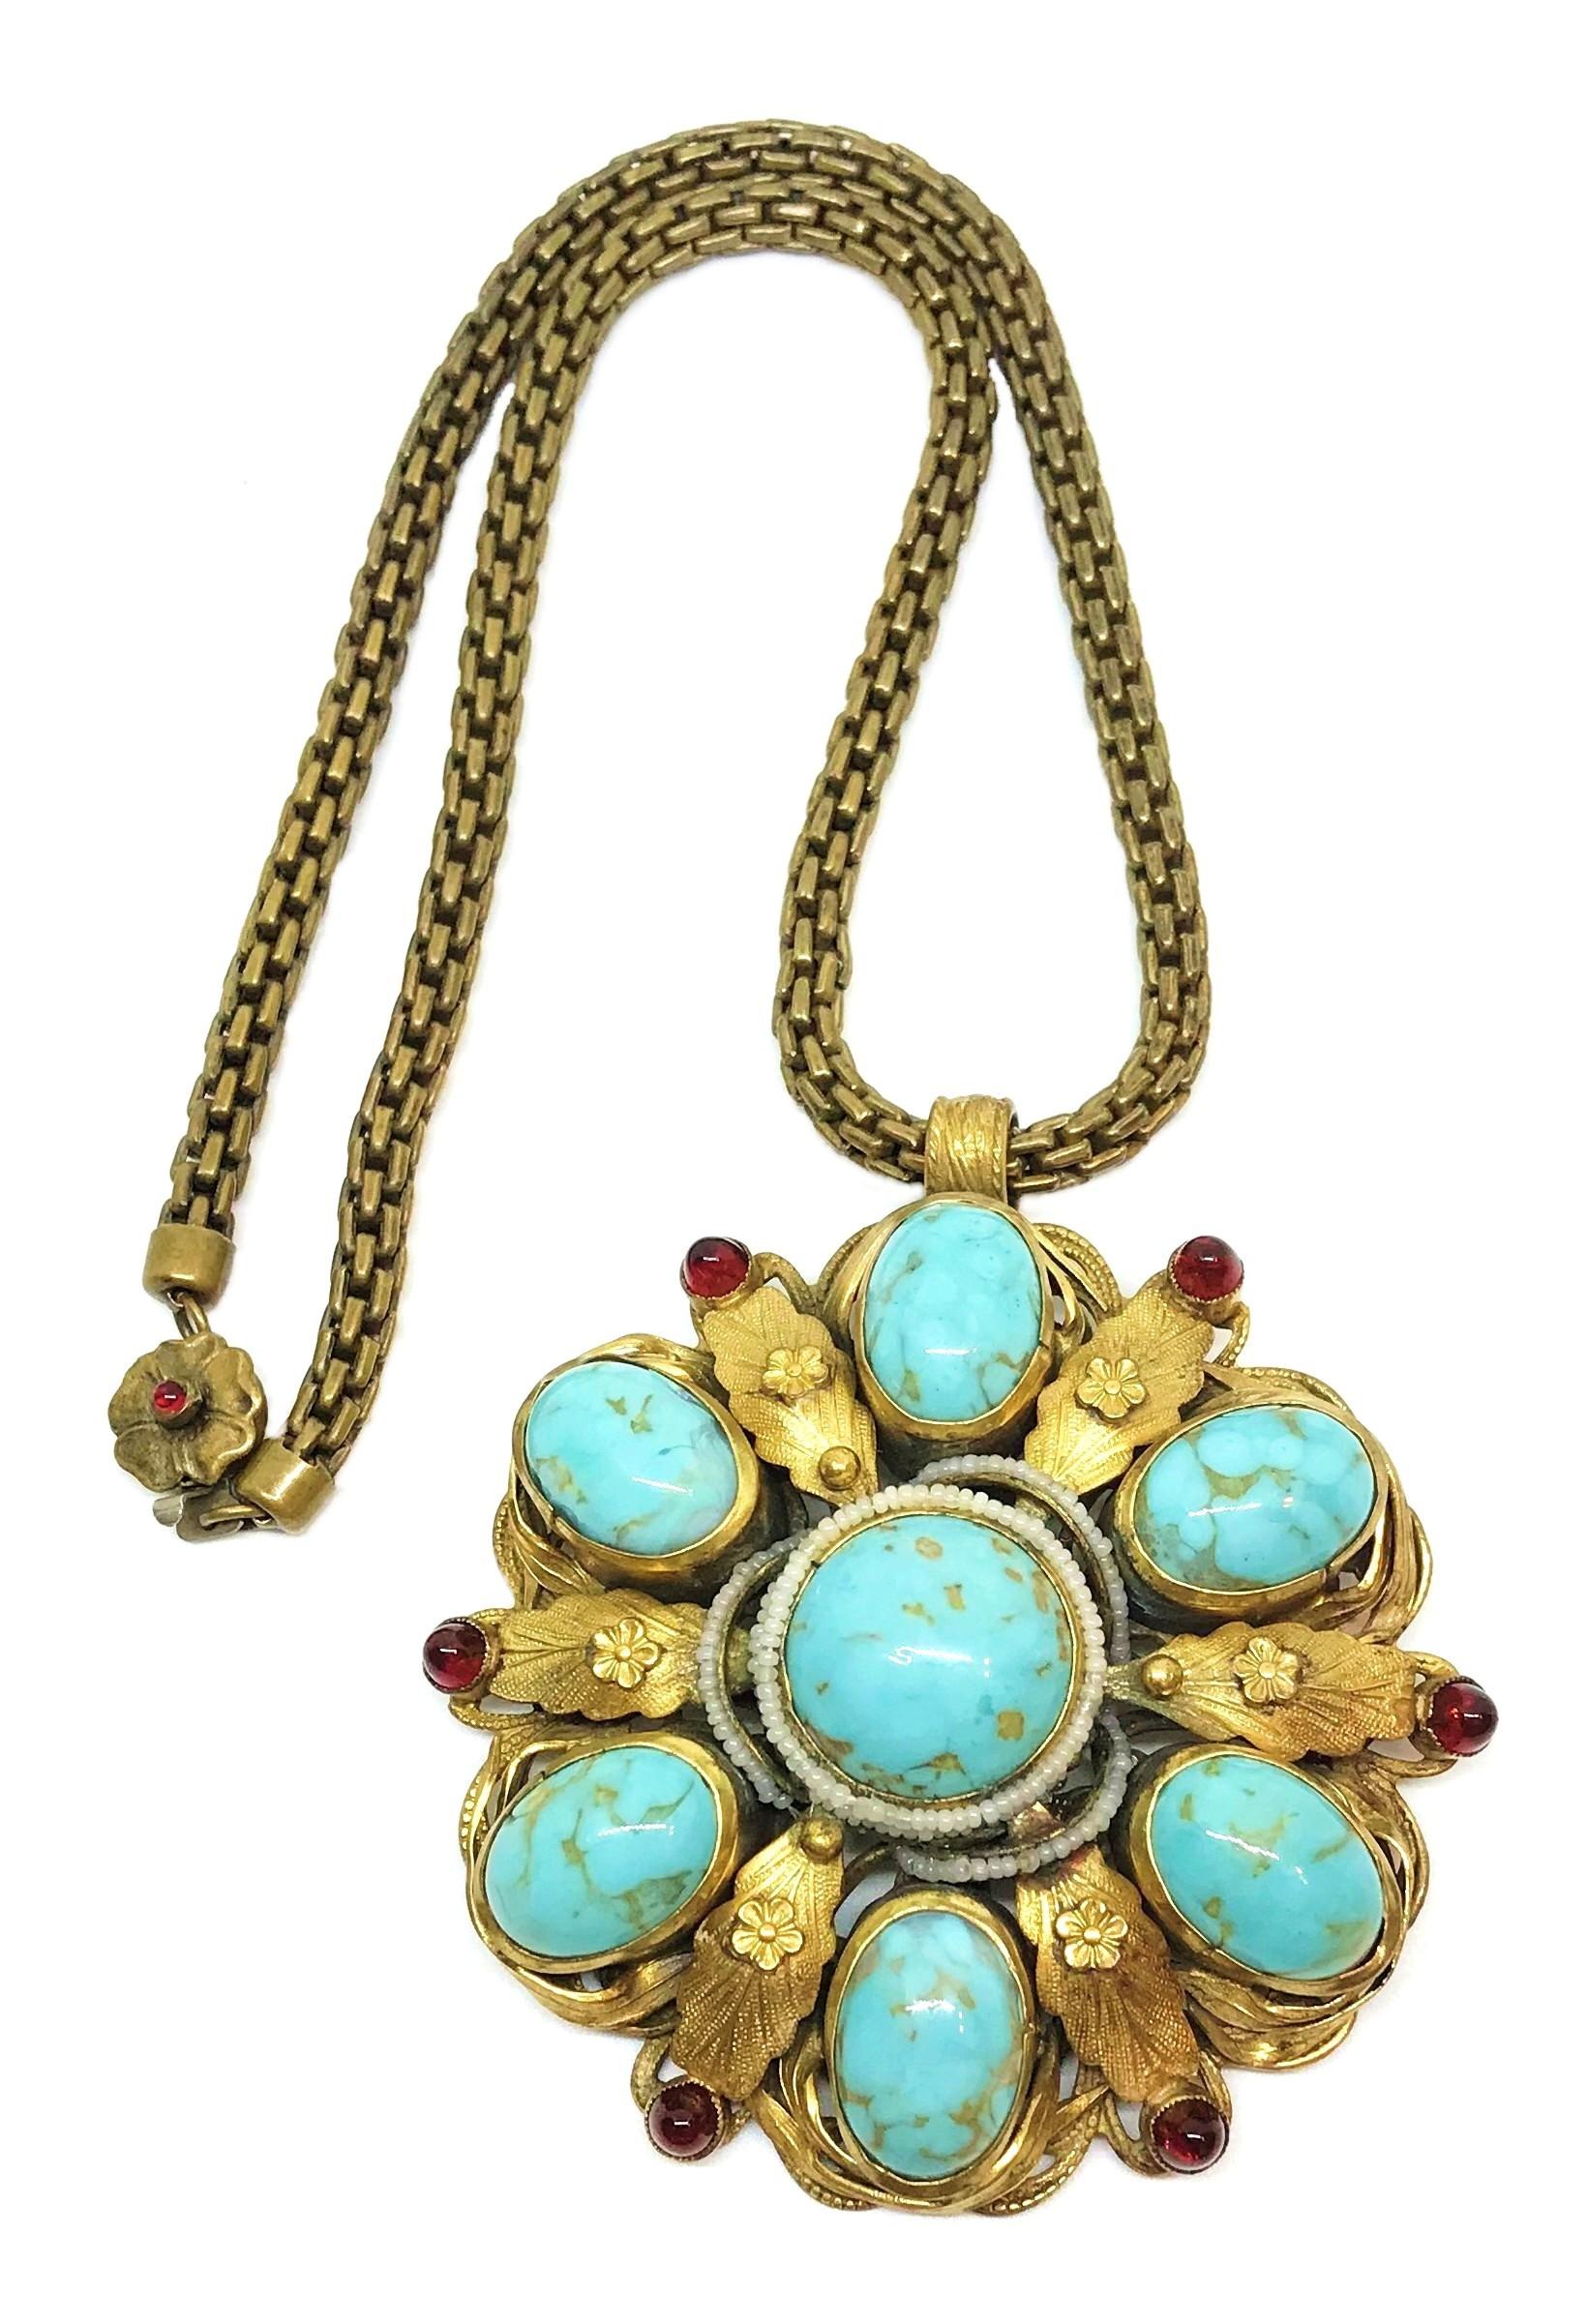 Circa 1940s gold tone metal chain necklace with a large, ornate pendant bezel set with oval and round turquoise glass cabochons.  The pendant measures 3.25